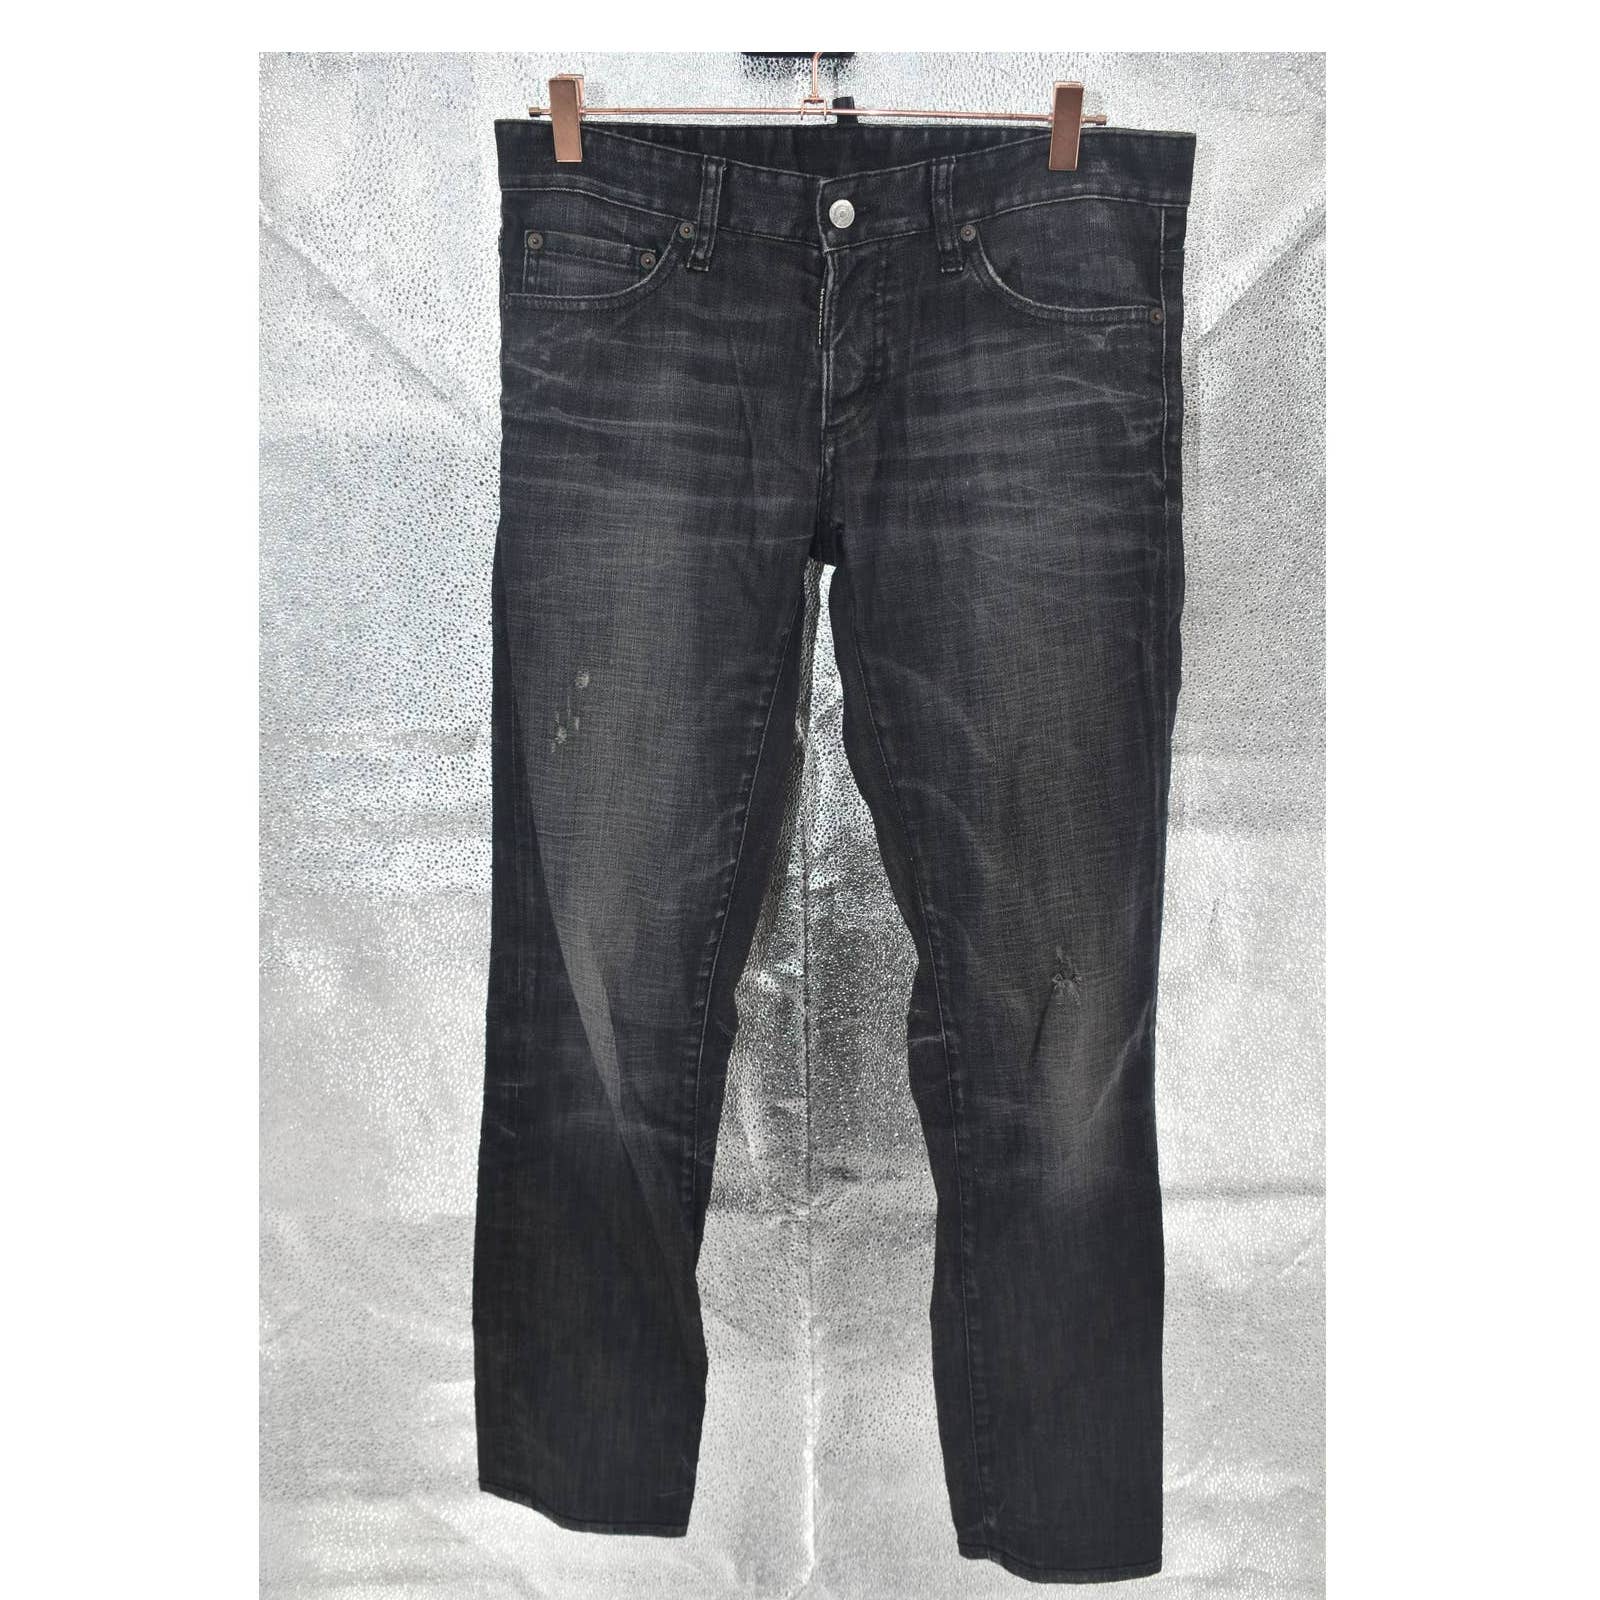 Dsquared2 Black Distressed Denim Button Fly Jeans - 48 / 32